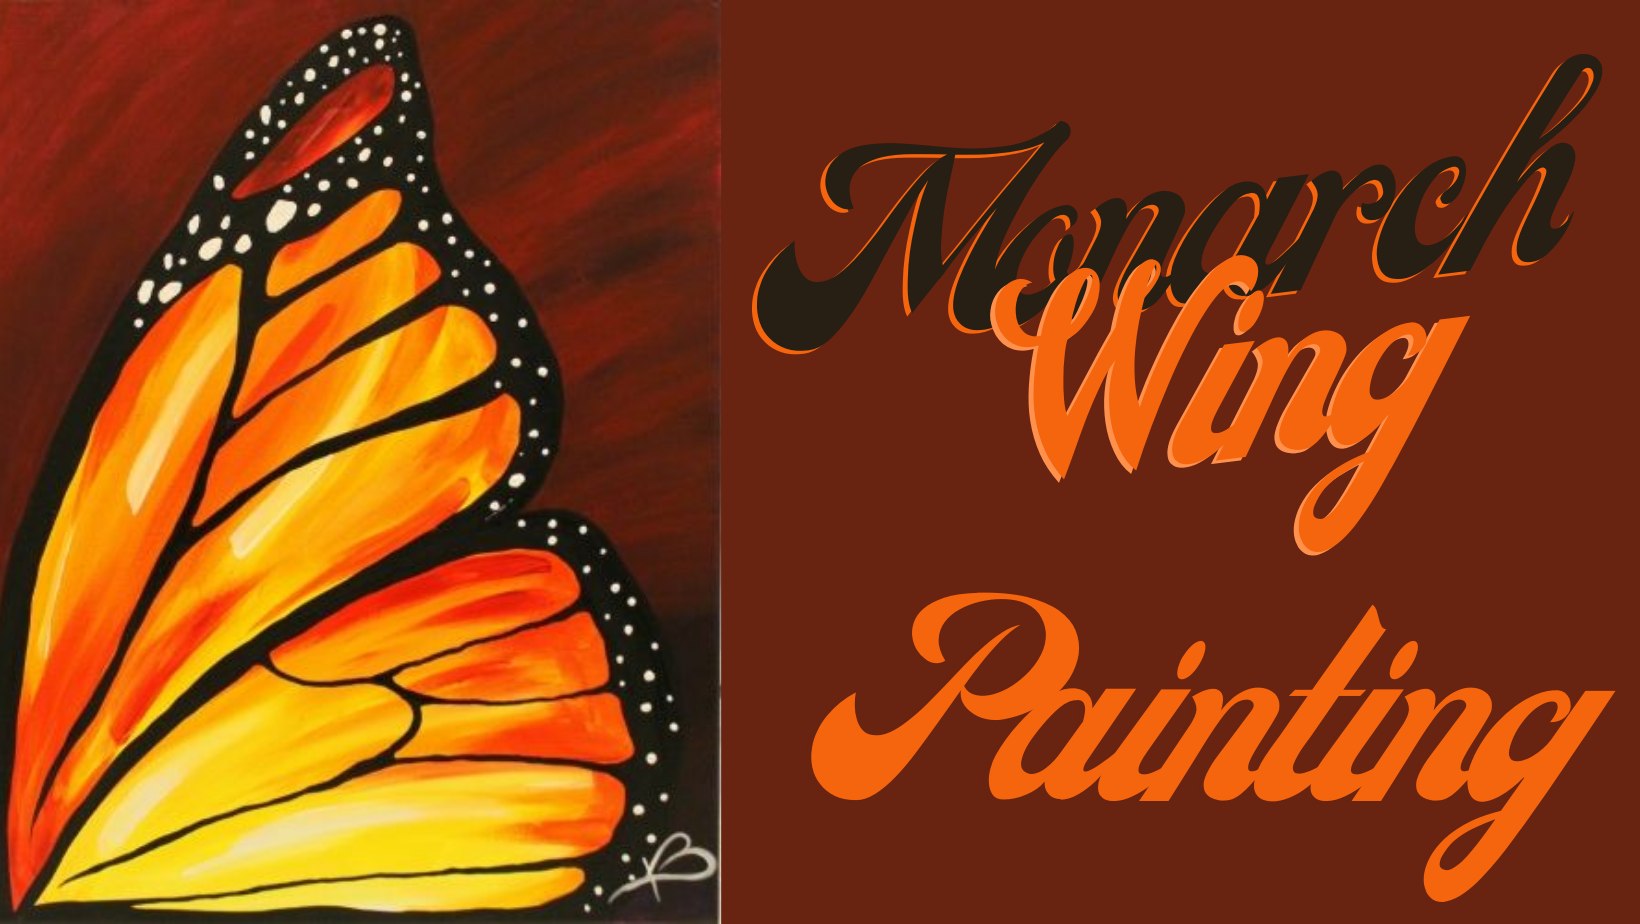 Monarch Wing Painting